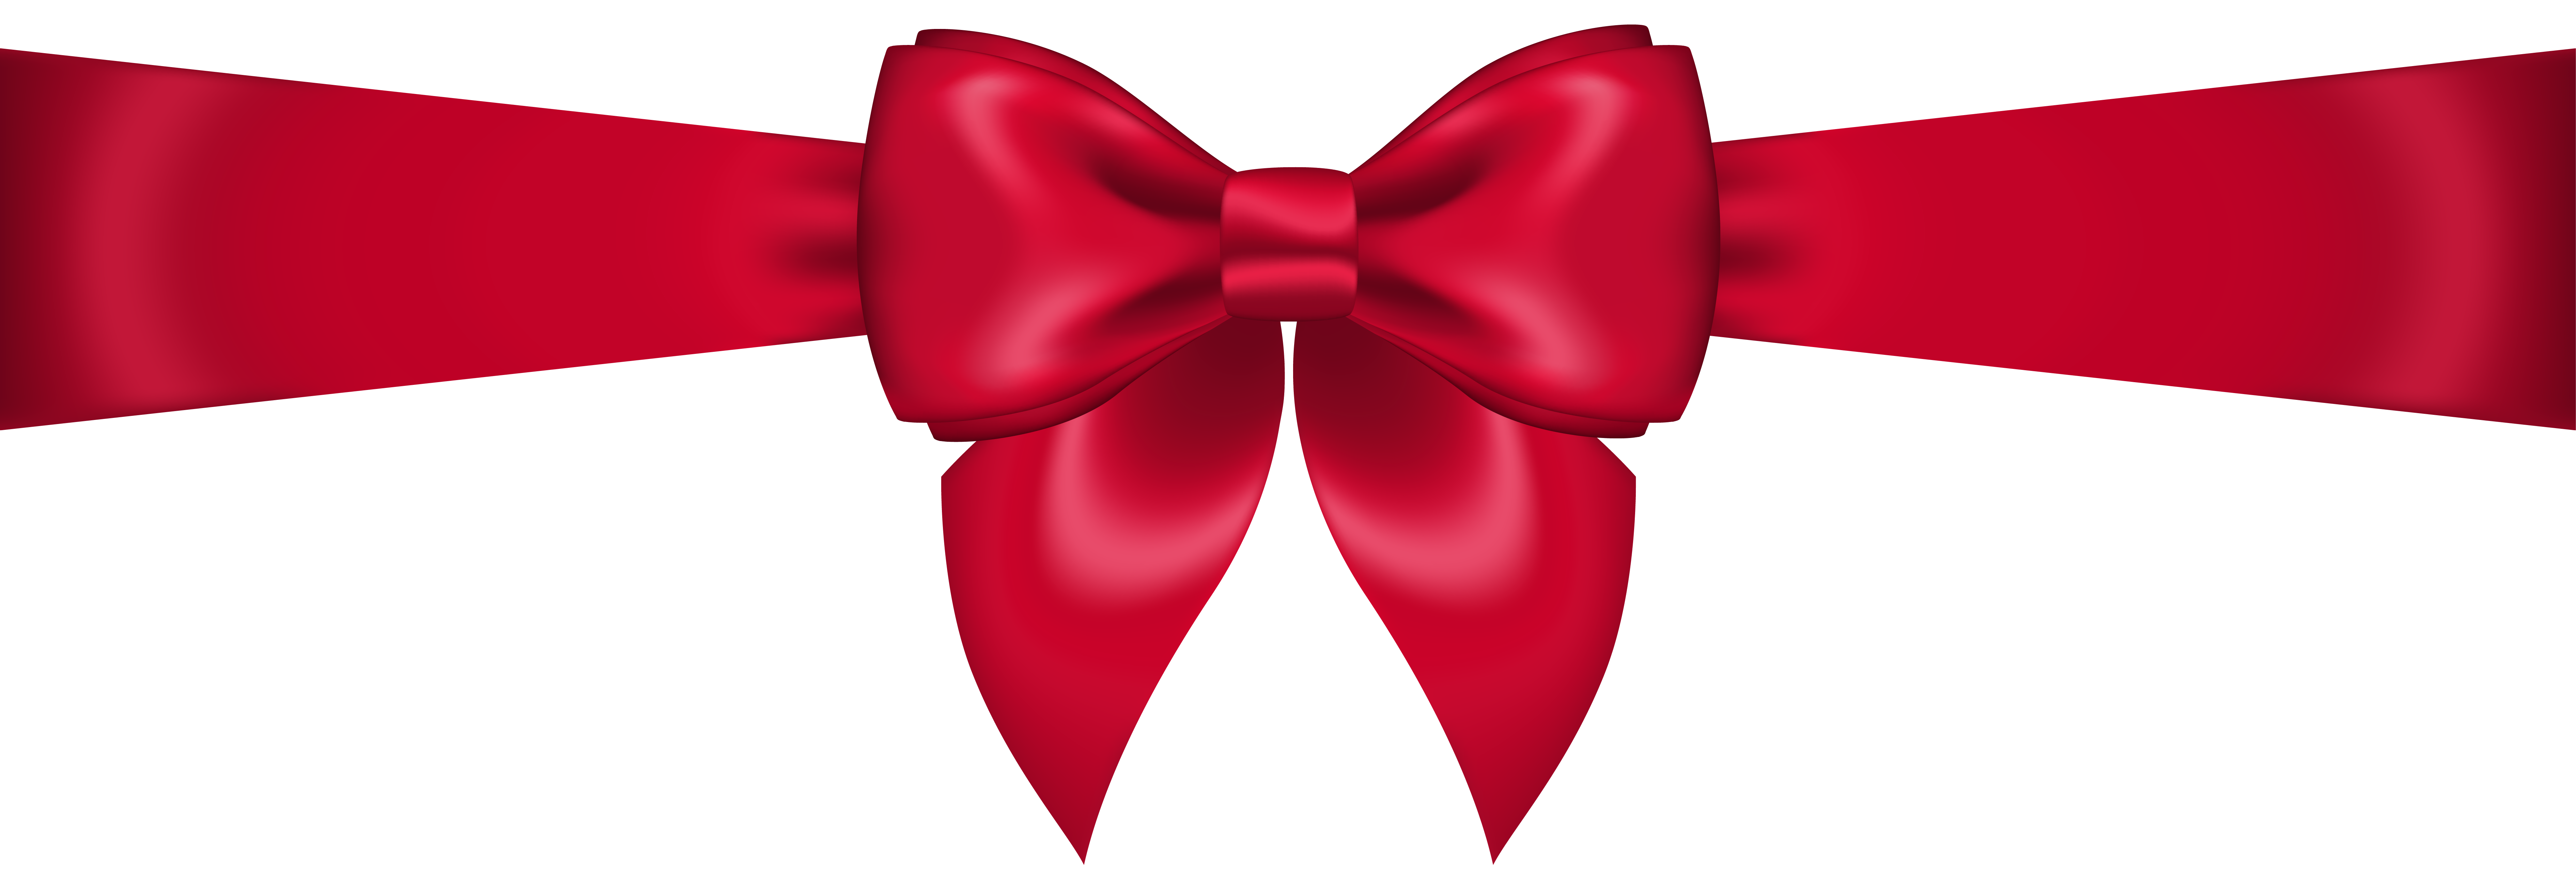 Red ribbon clipart no background